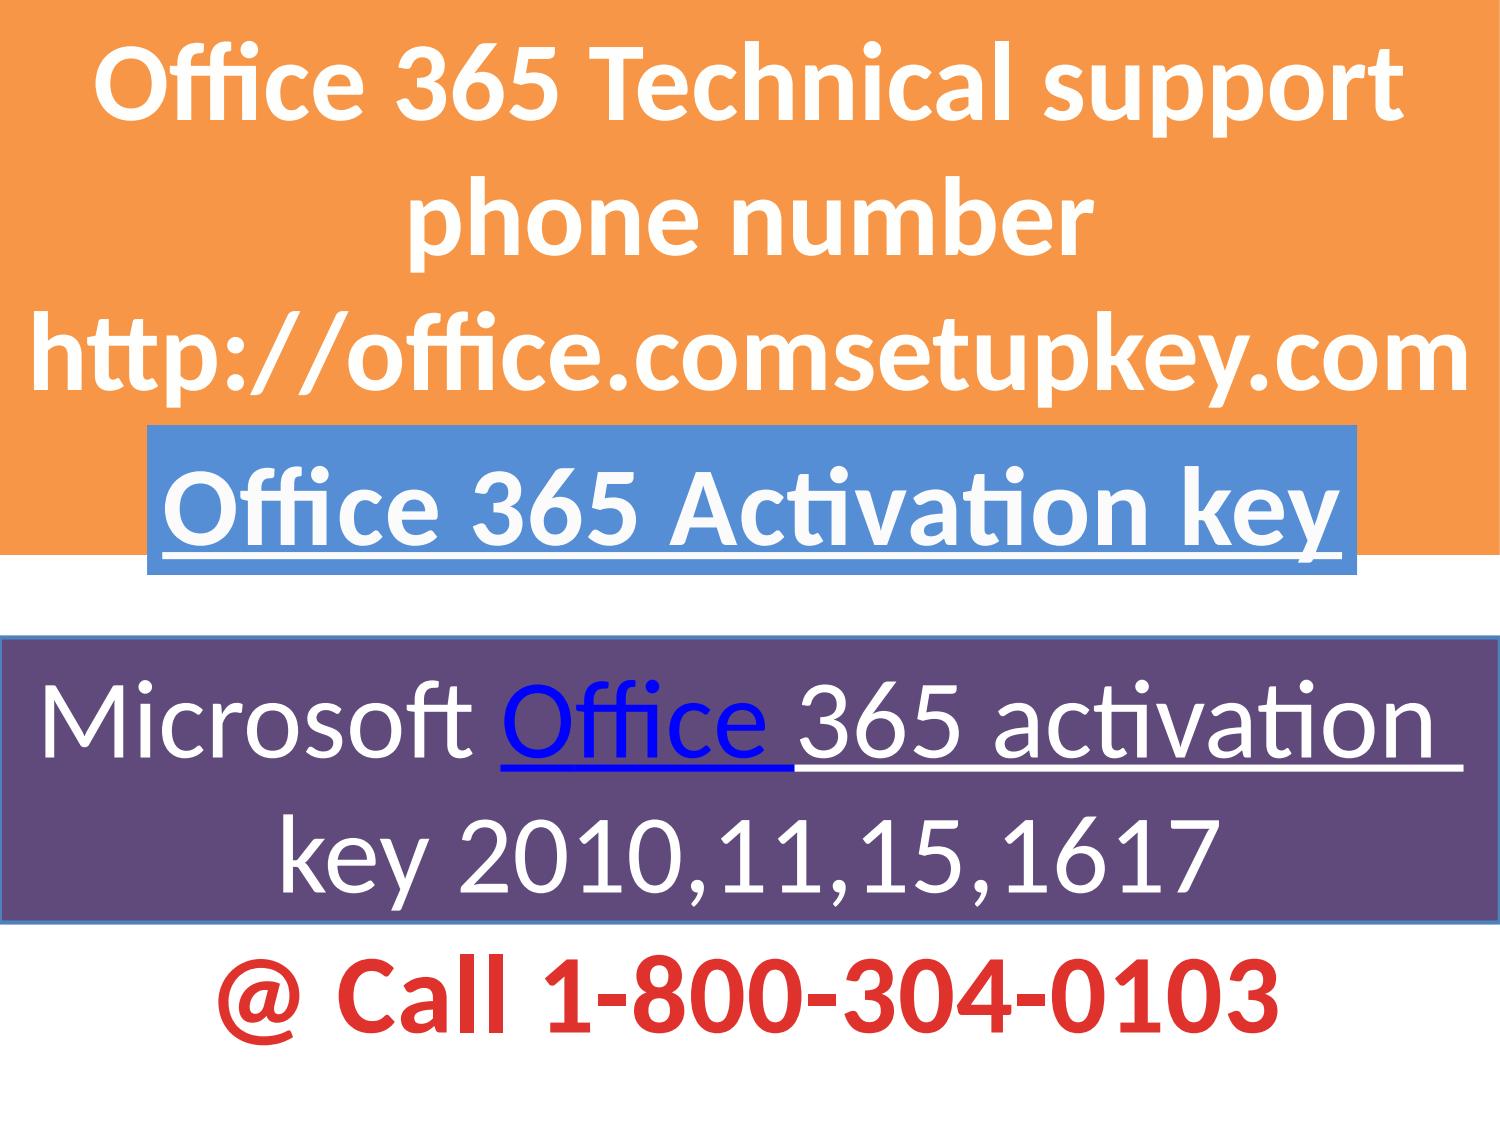 Microsoft office activation phone number